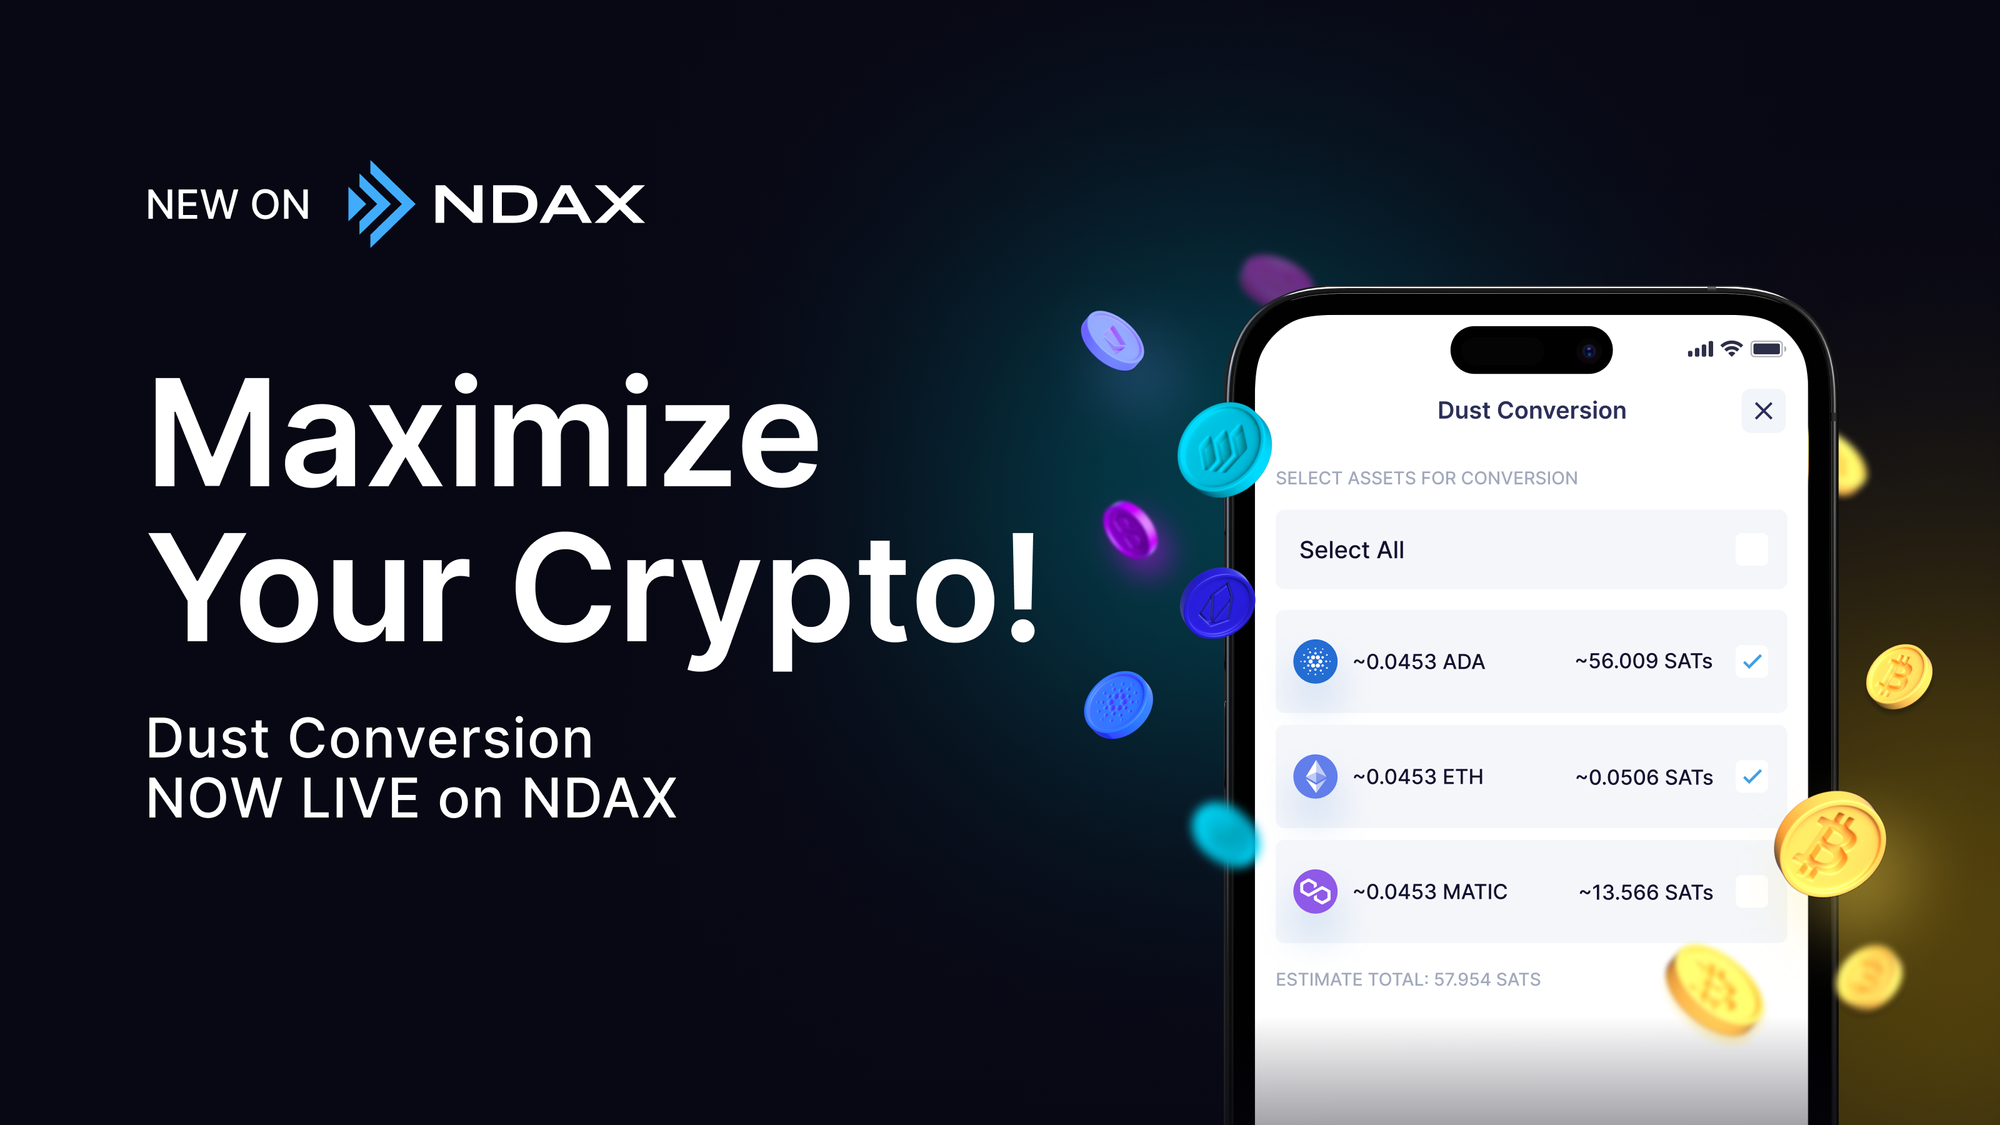 Tired of Crypto Dust? Enter NDAX’ New Dust Conversion Feature